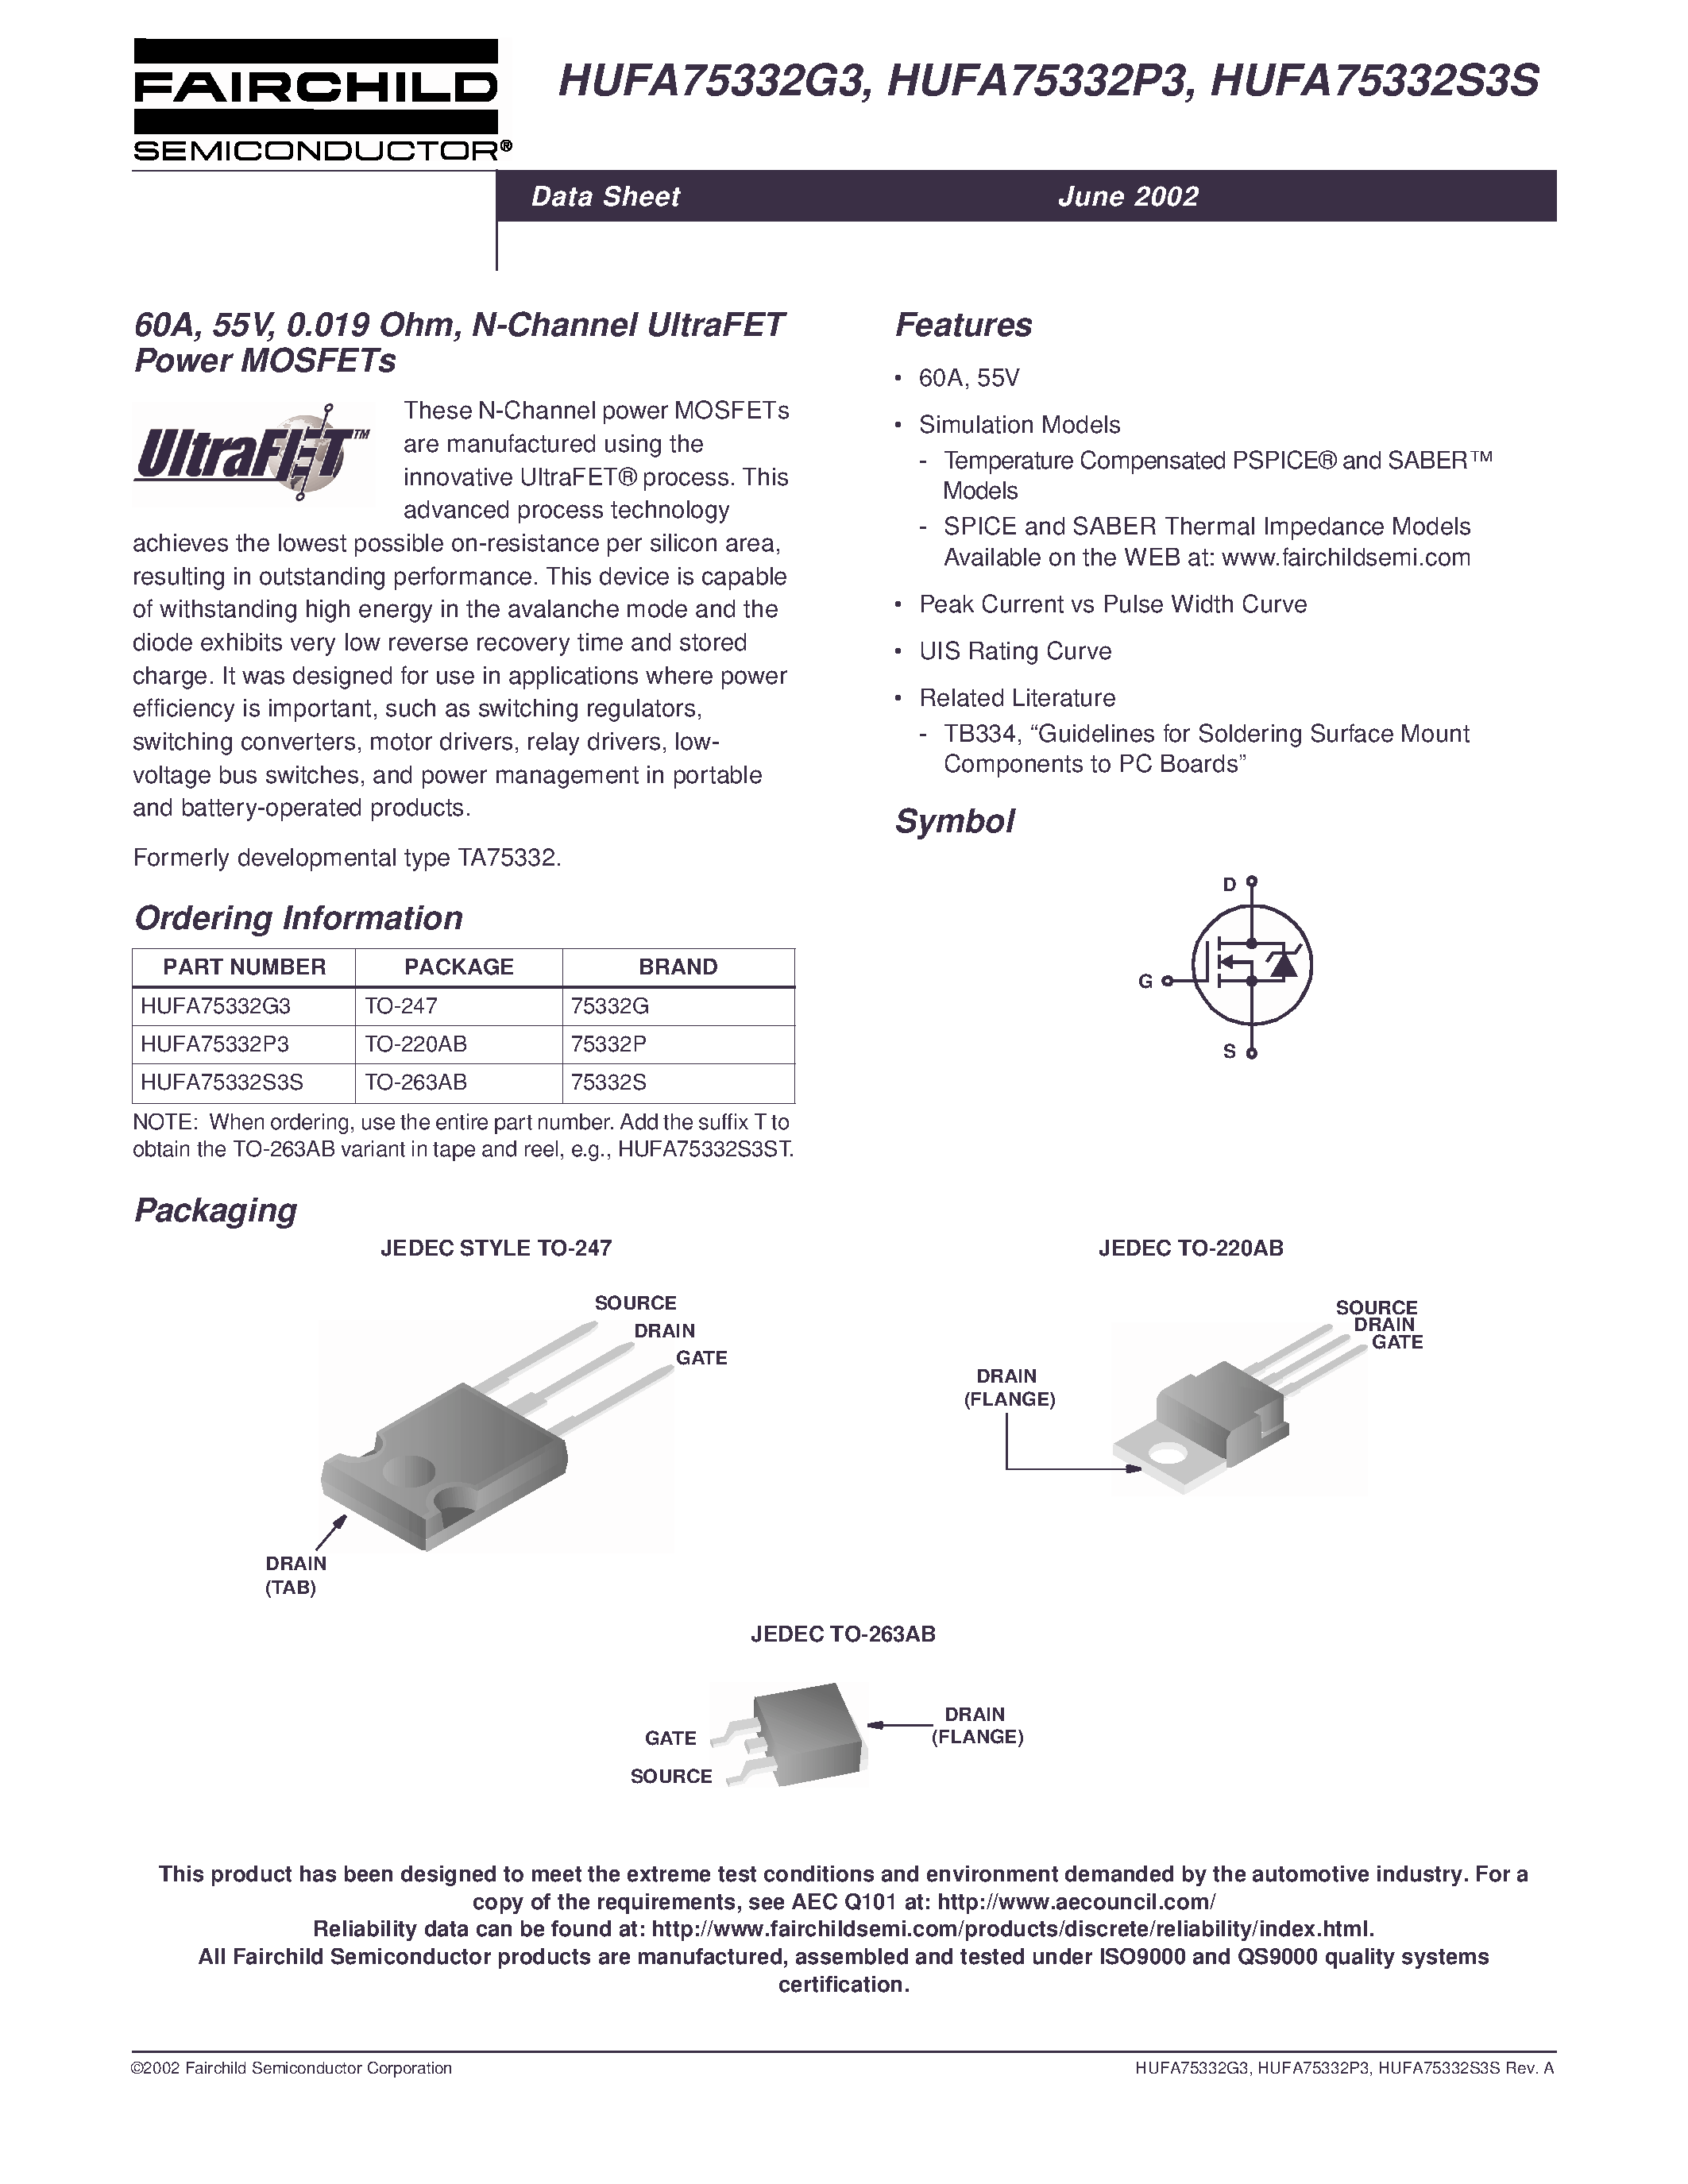 Даташит HUFA75329P3 - 49A/ 55V/ 0.024 Ohm/ N-Channel UltraFET Power MOSFETs страница 1